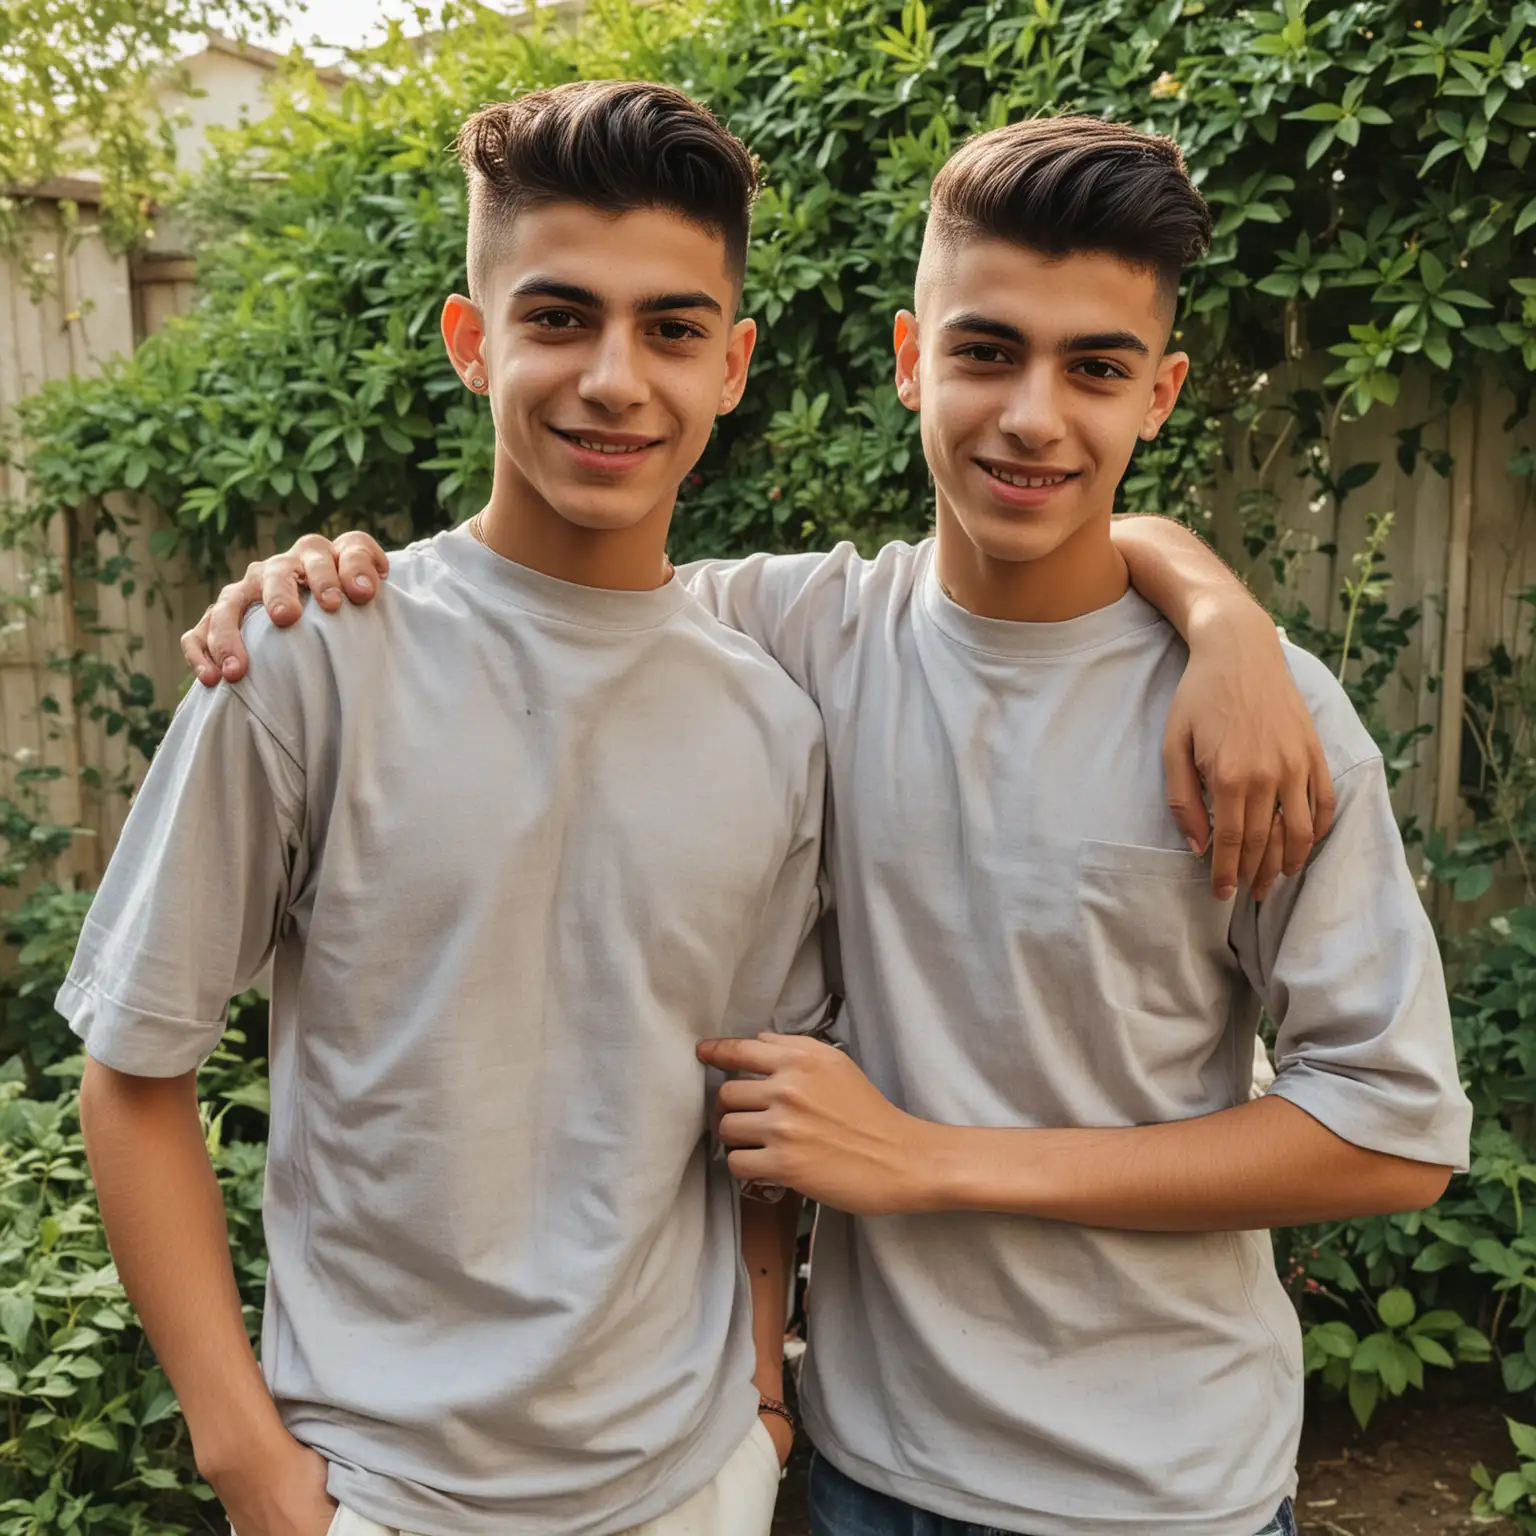 two brothers, one is around 25 years old, the other is around 14 years old, theyre race is persian, they have skin fade haircuts,  they are outside having fun in a garden
